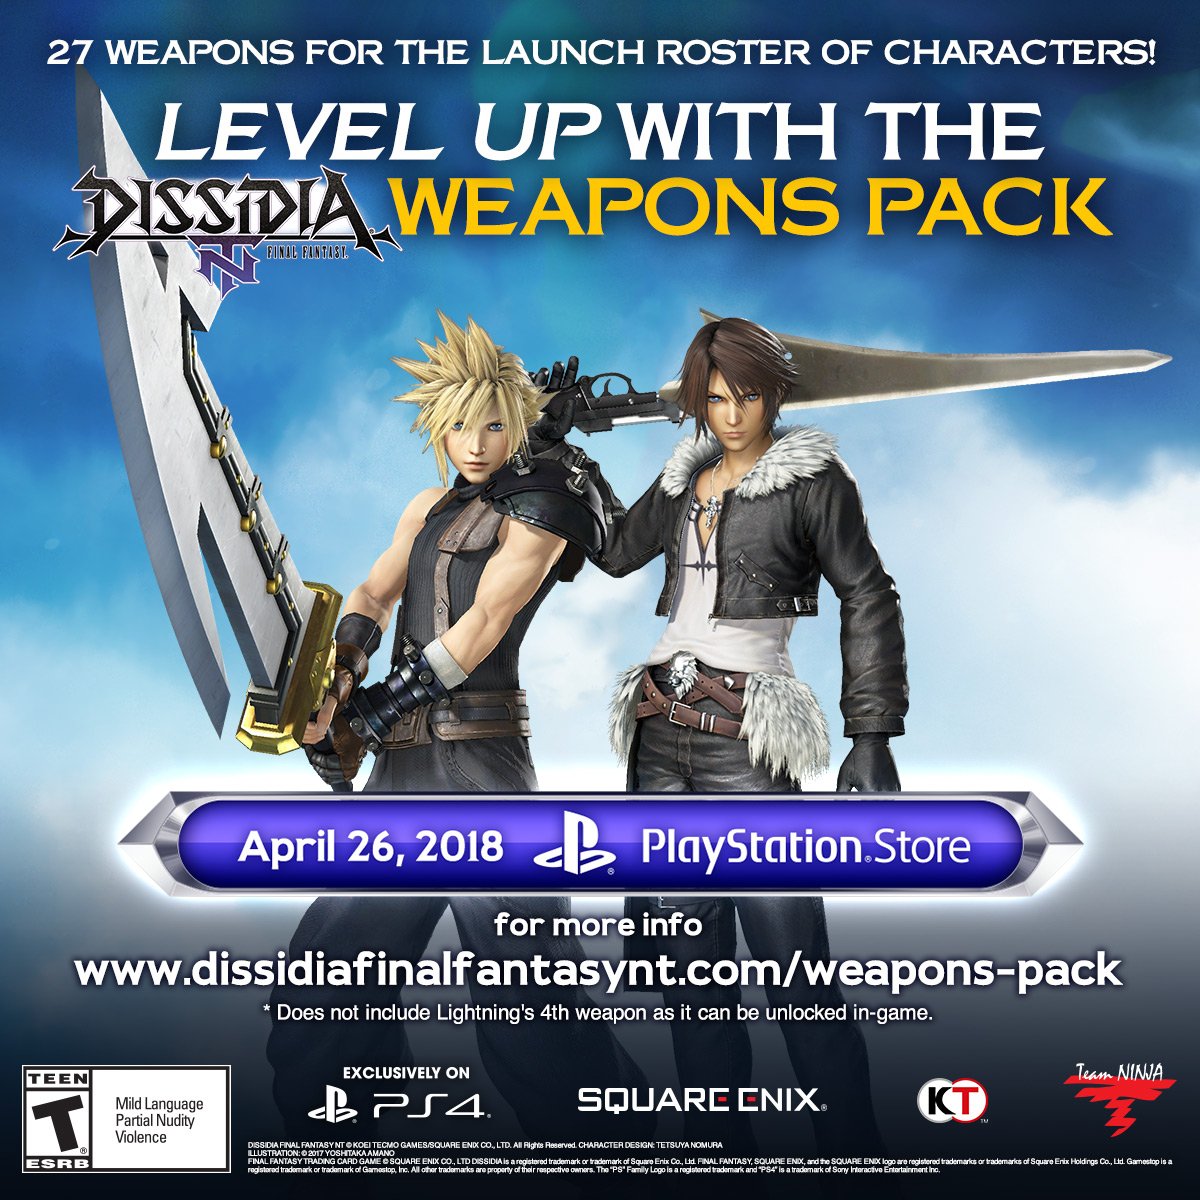 Final Fantasy Let The Countdown Begin On April 26th Make Sure To Get Your Dissidiaffnt Weapons Pack Get Access To All 27 Characters 4th Weapon Lightning S 4th Weapon Can Be